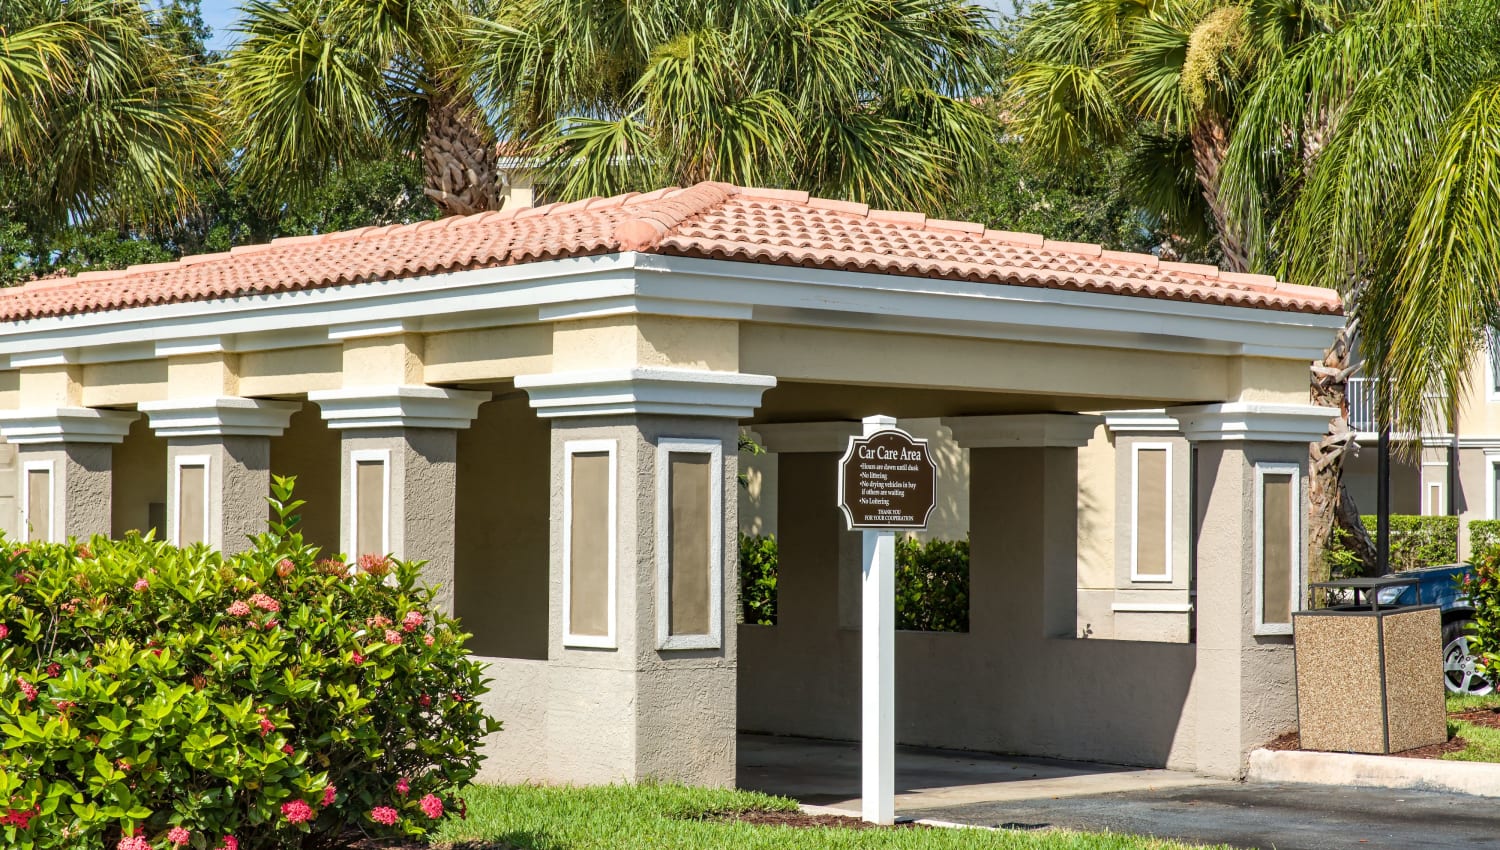 Car care area at Ibis Reserve Apartments in West Palm Beach, Florida